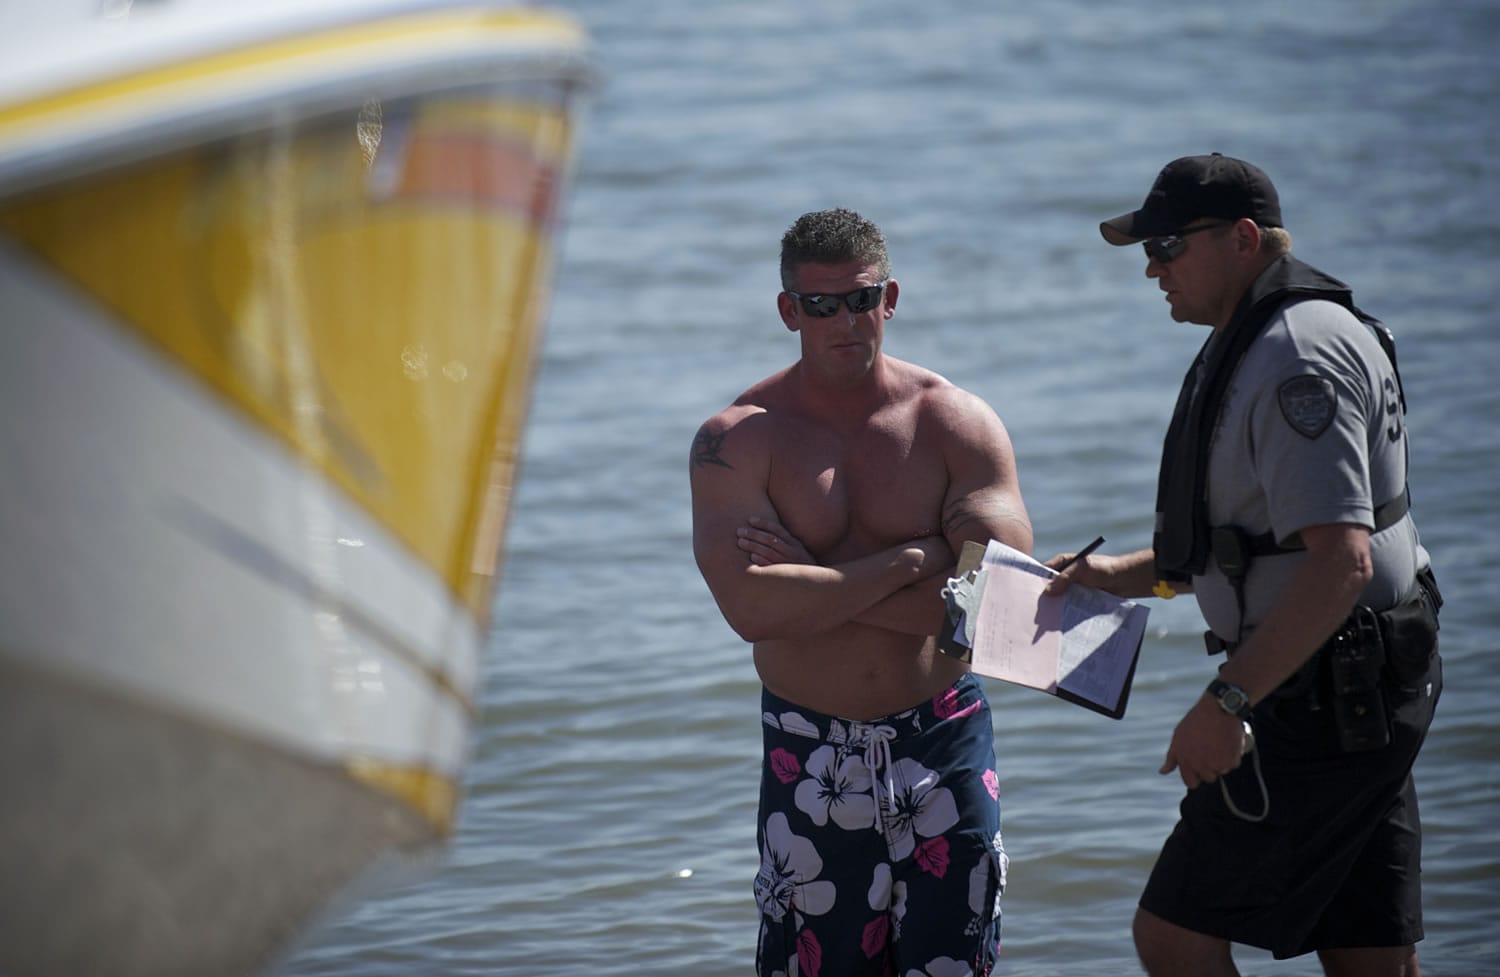 A police officer talks to the operator of a boat during the investigation of a boating accident at Wintler Park on Saturday.